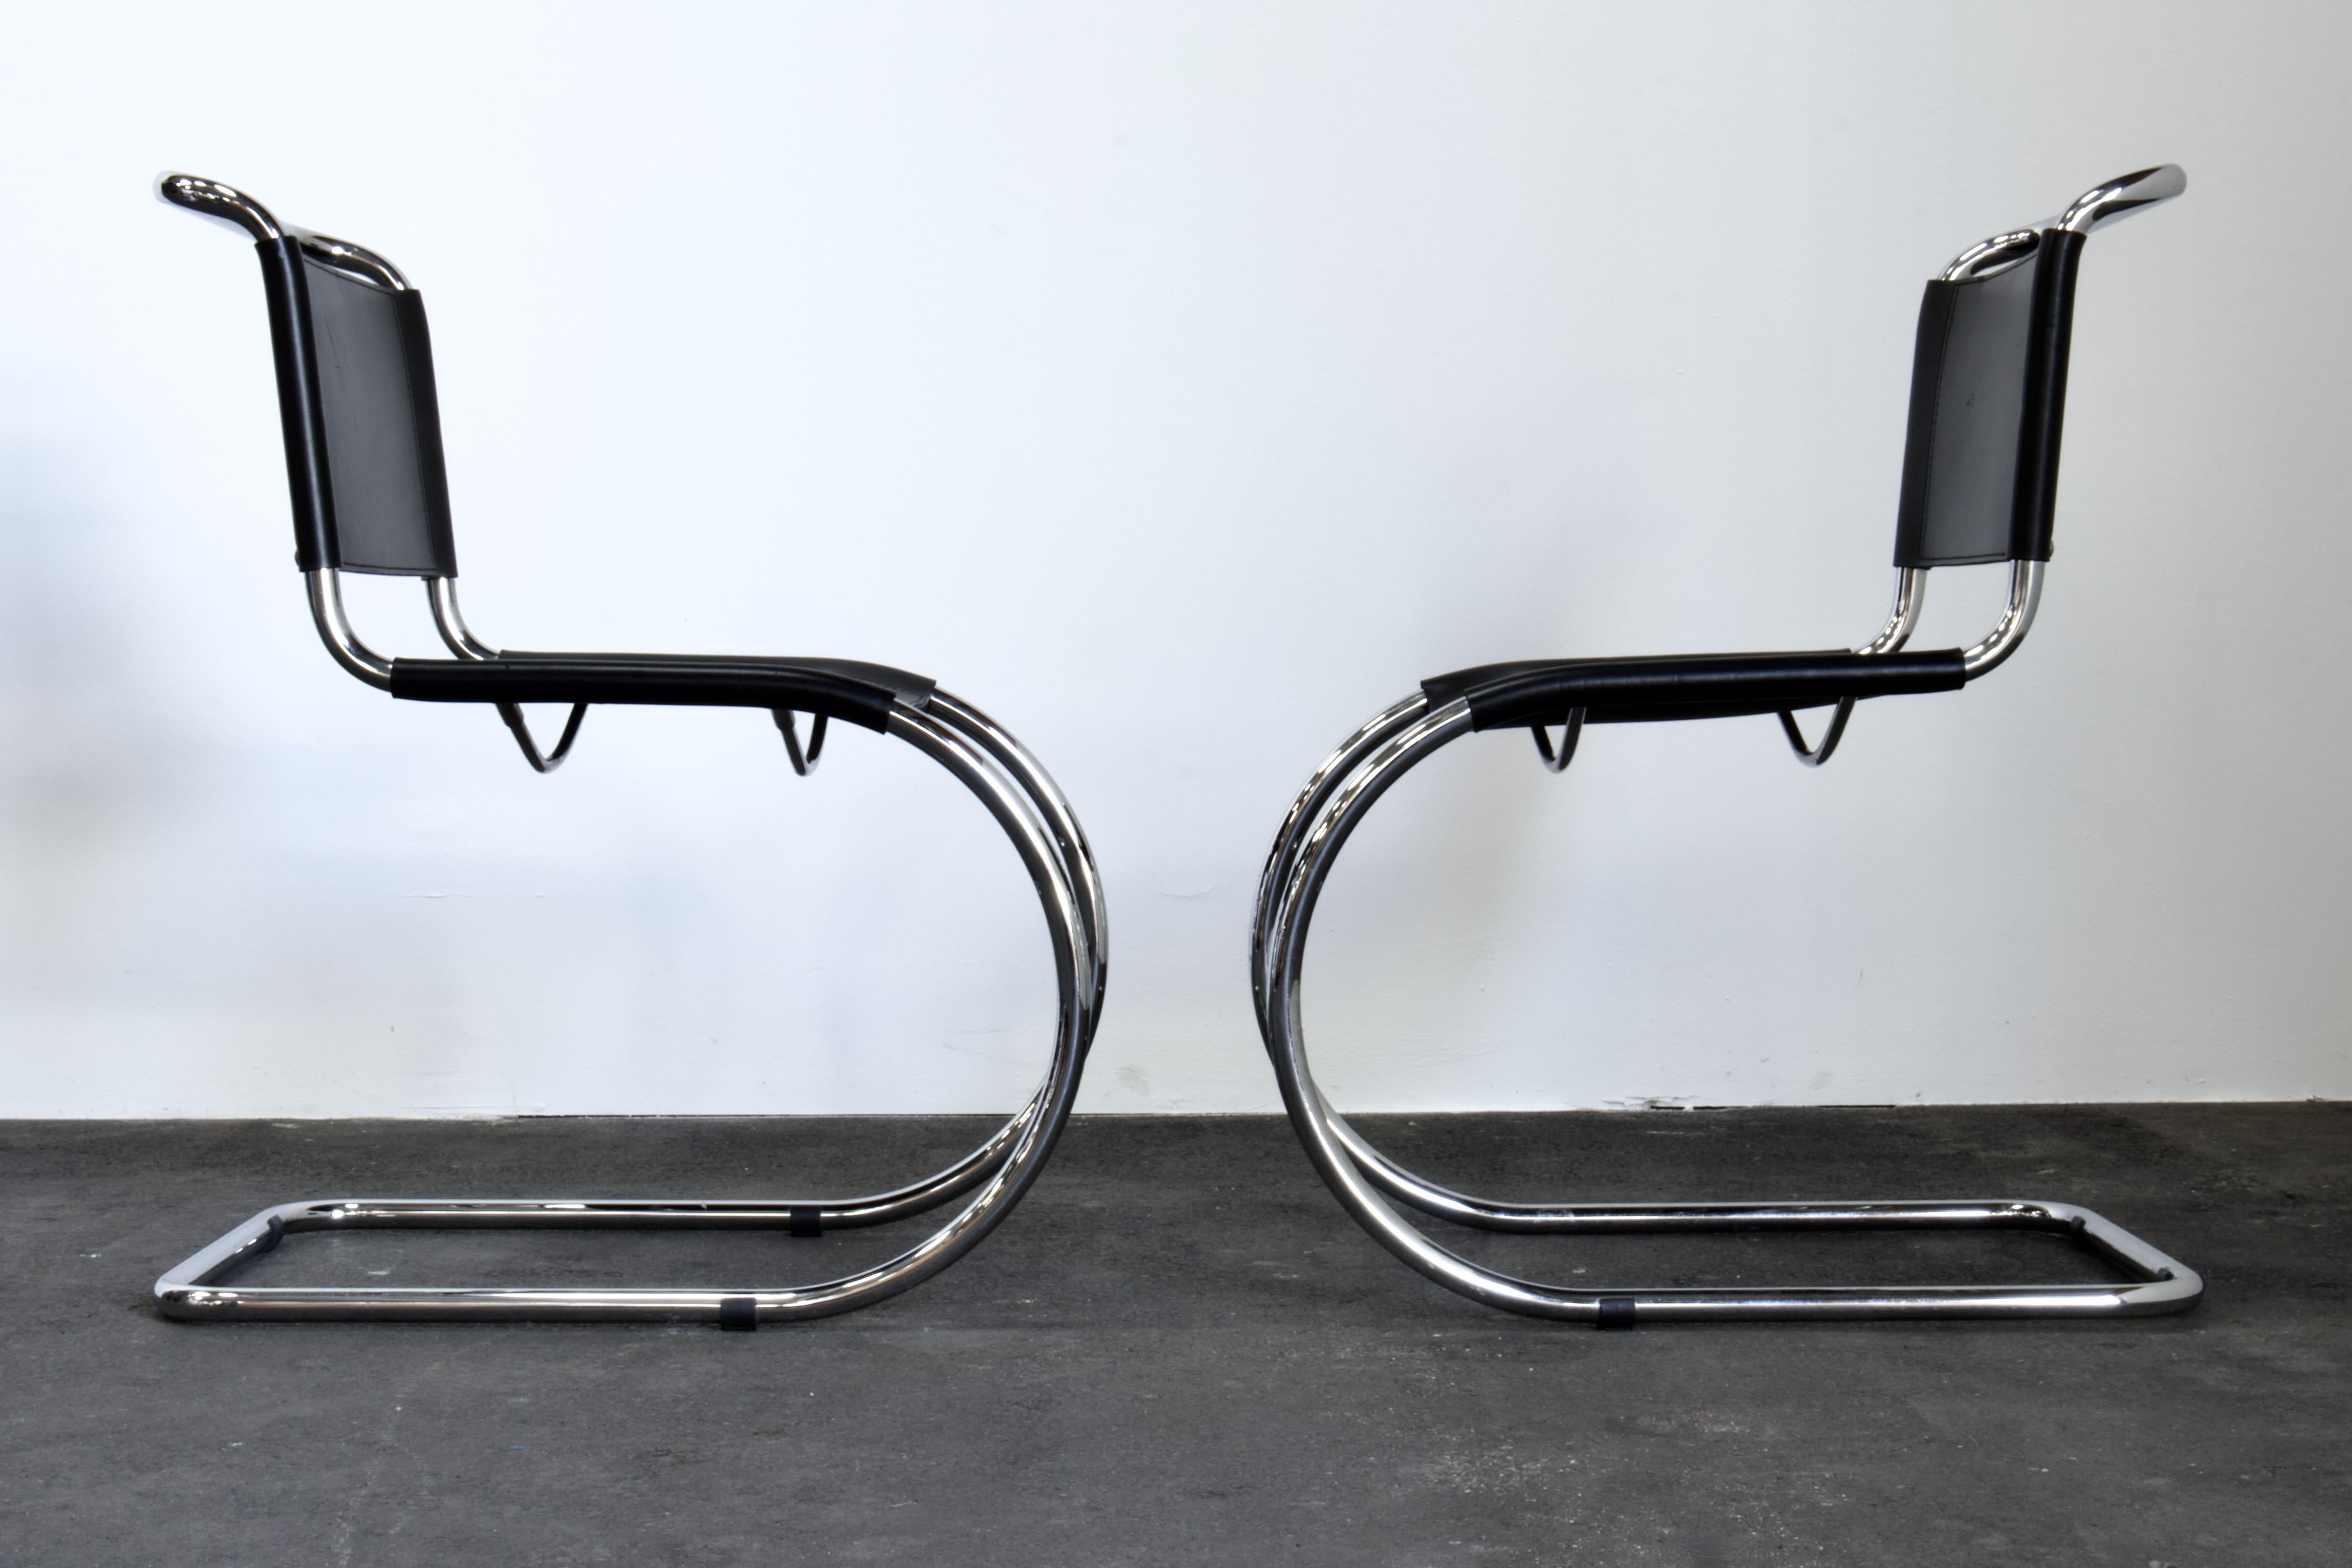 Set of 8 MR 10 cantilever chairs (256cs) by Ludwig Mies van der Rohe. This set is made in high quality black vegetable tanned saddle leather by Gavina in Italy c.1980s. An absolute icon of the Bauhaus Movement and influential to the entire Mid